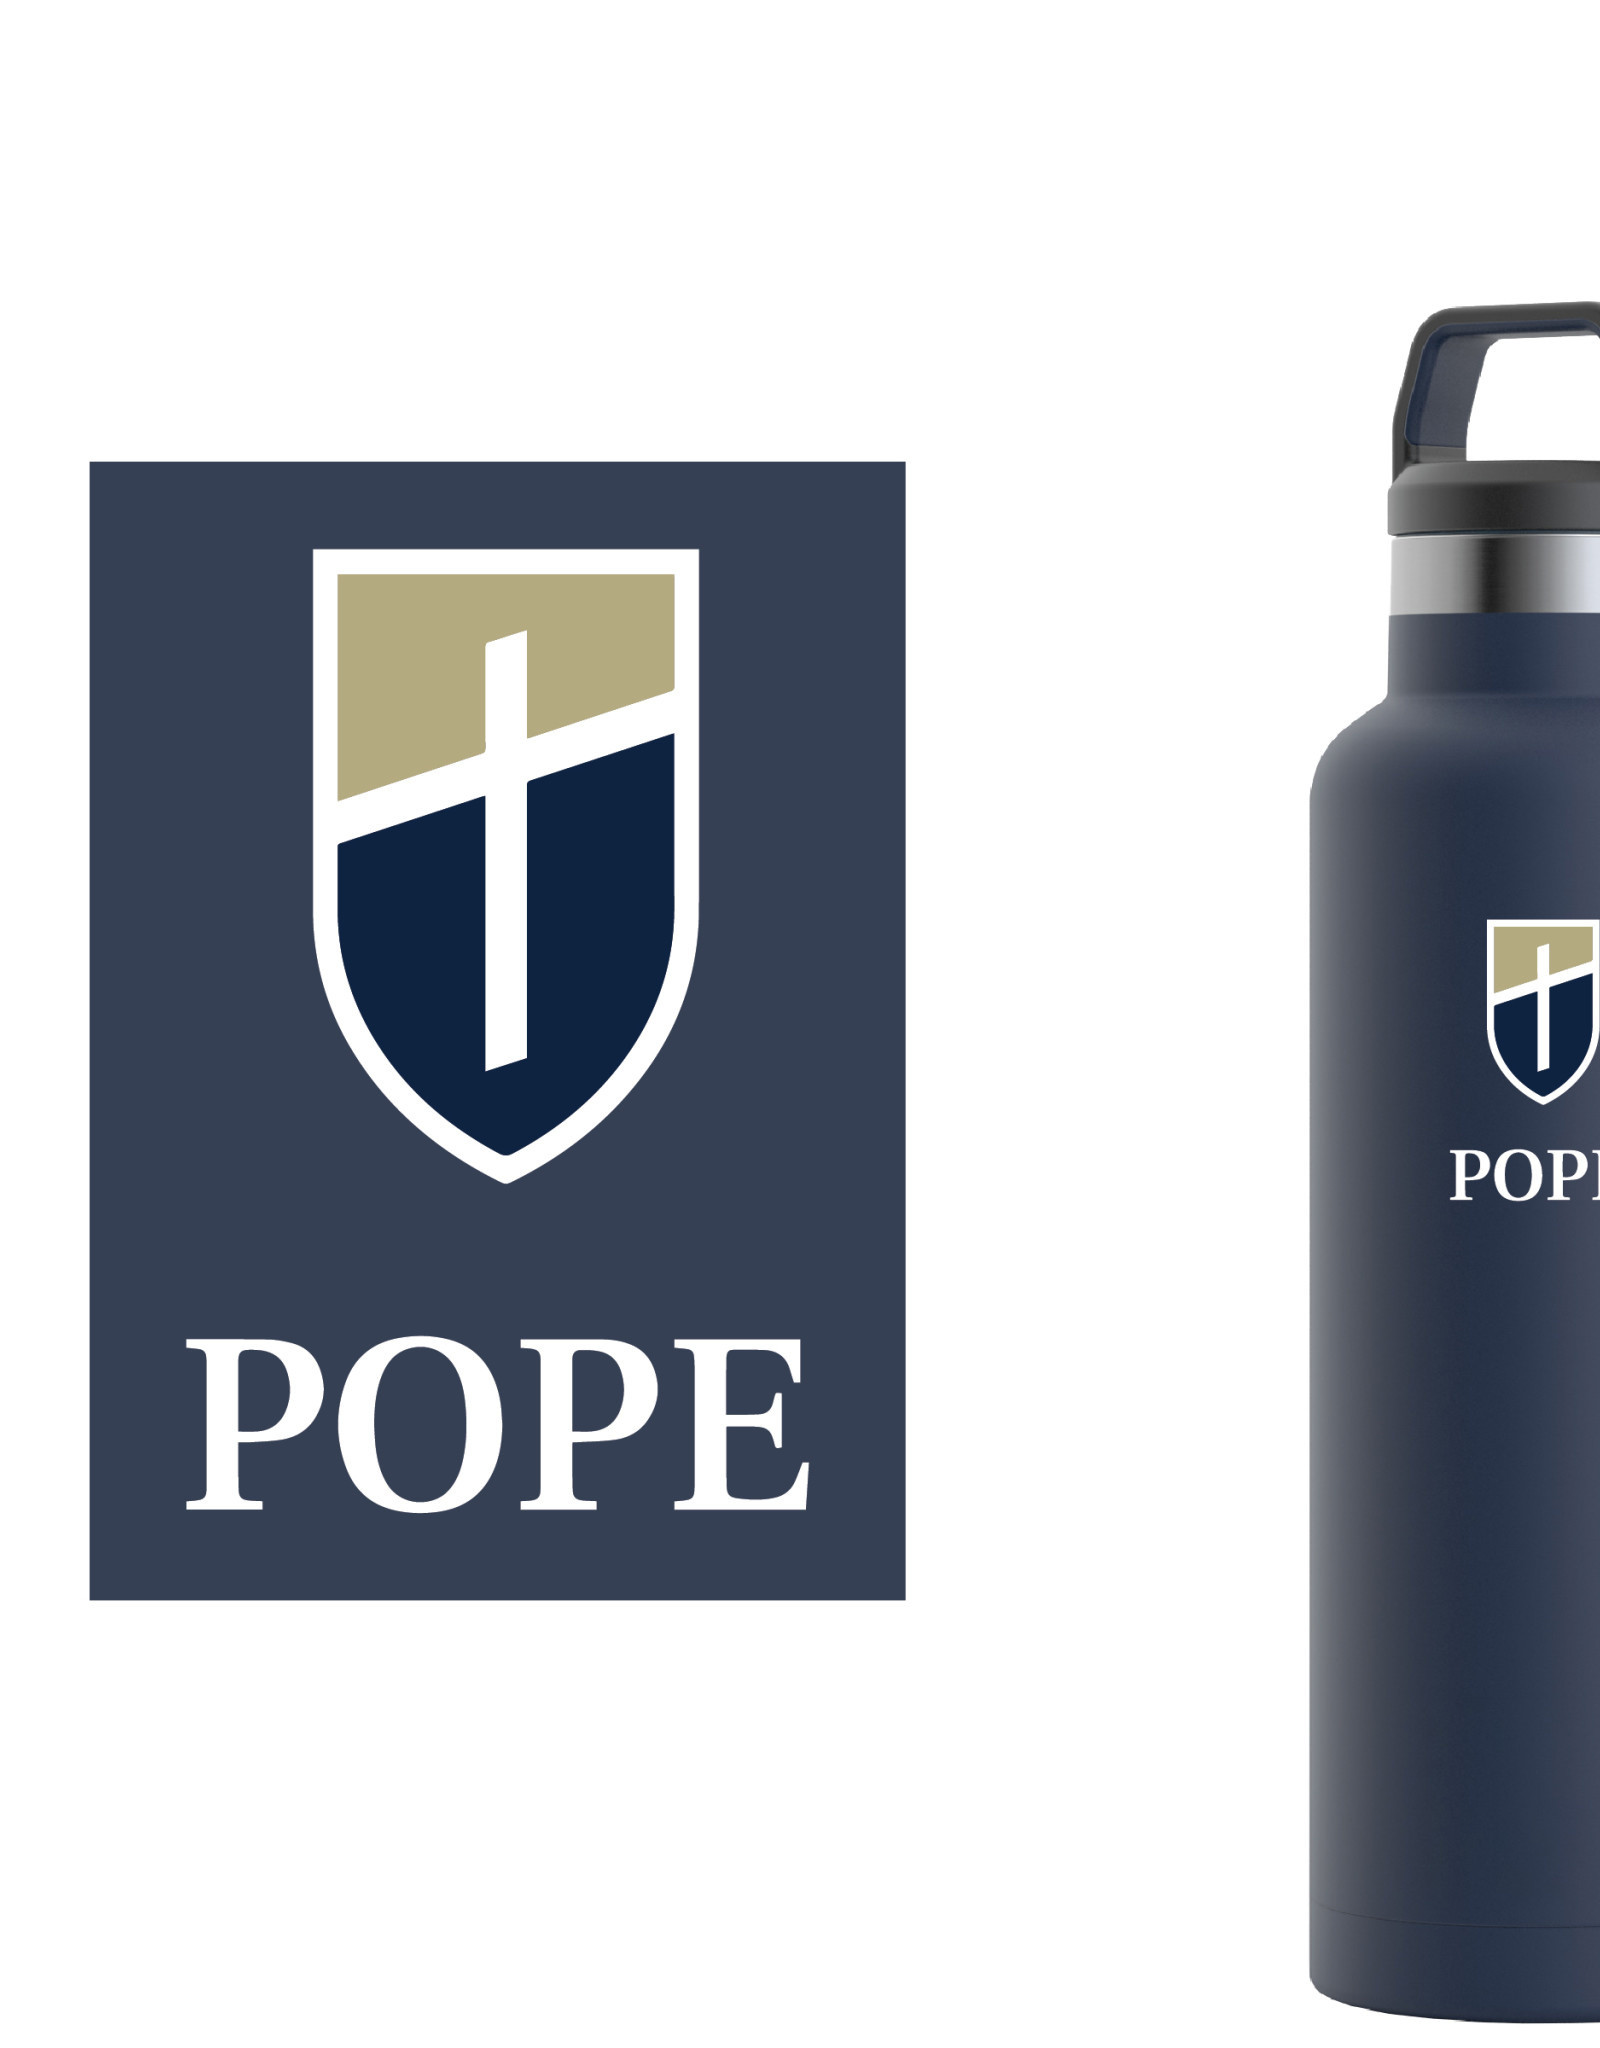 New! RTIC 20oz Insulated Water Bottle